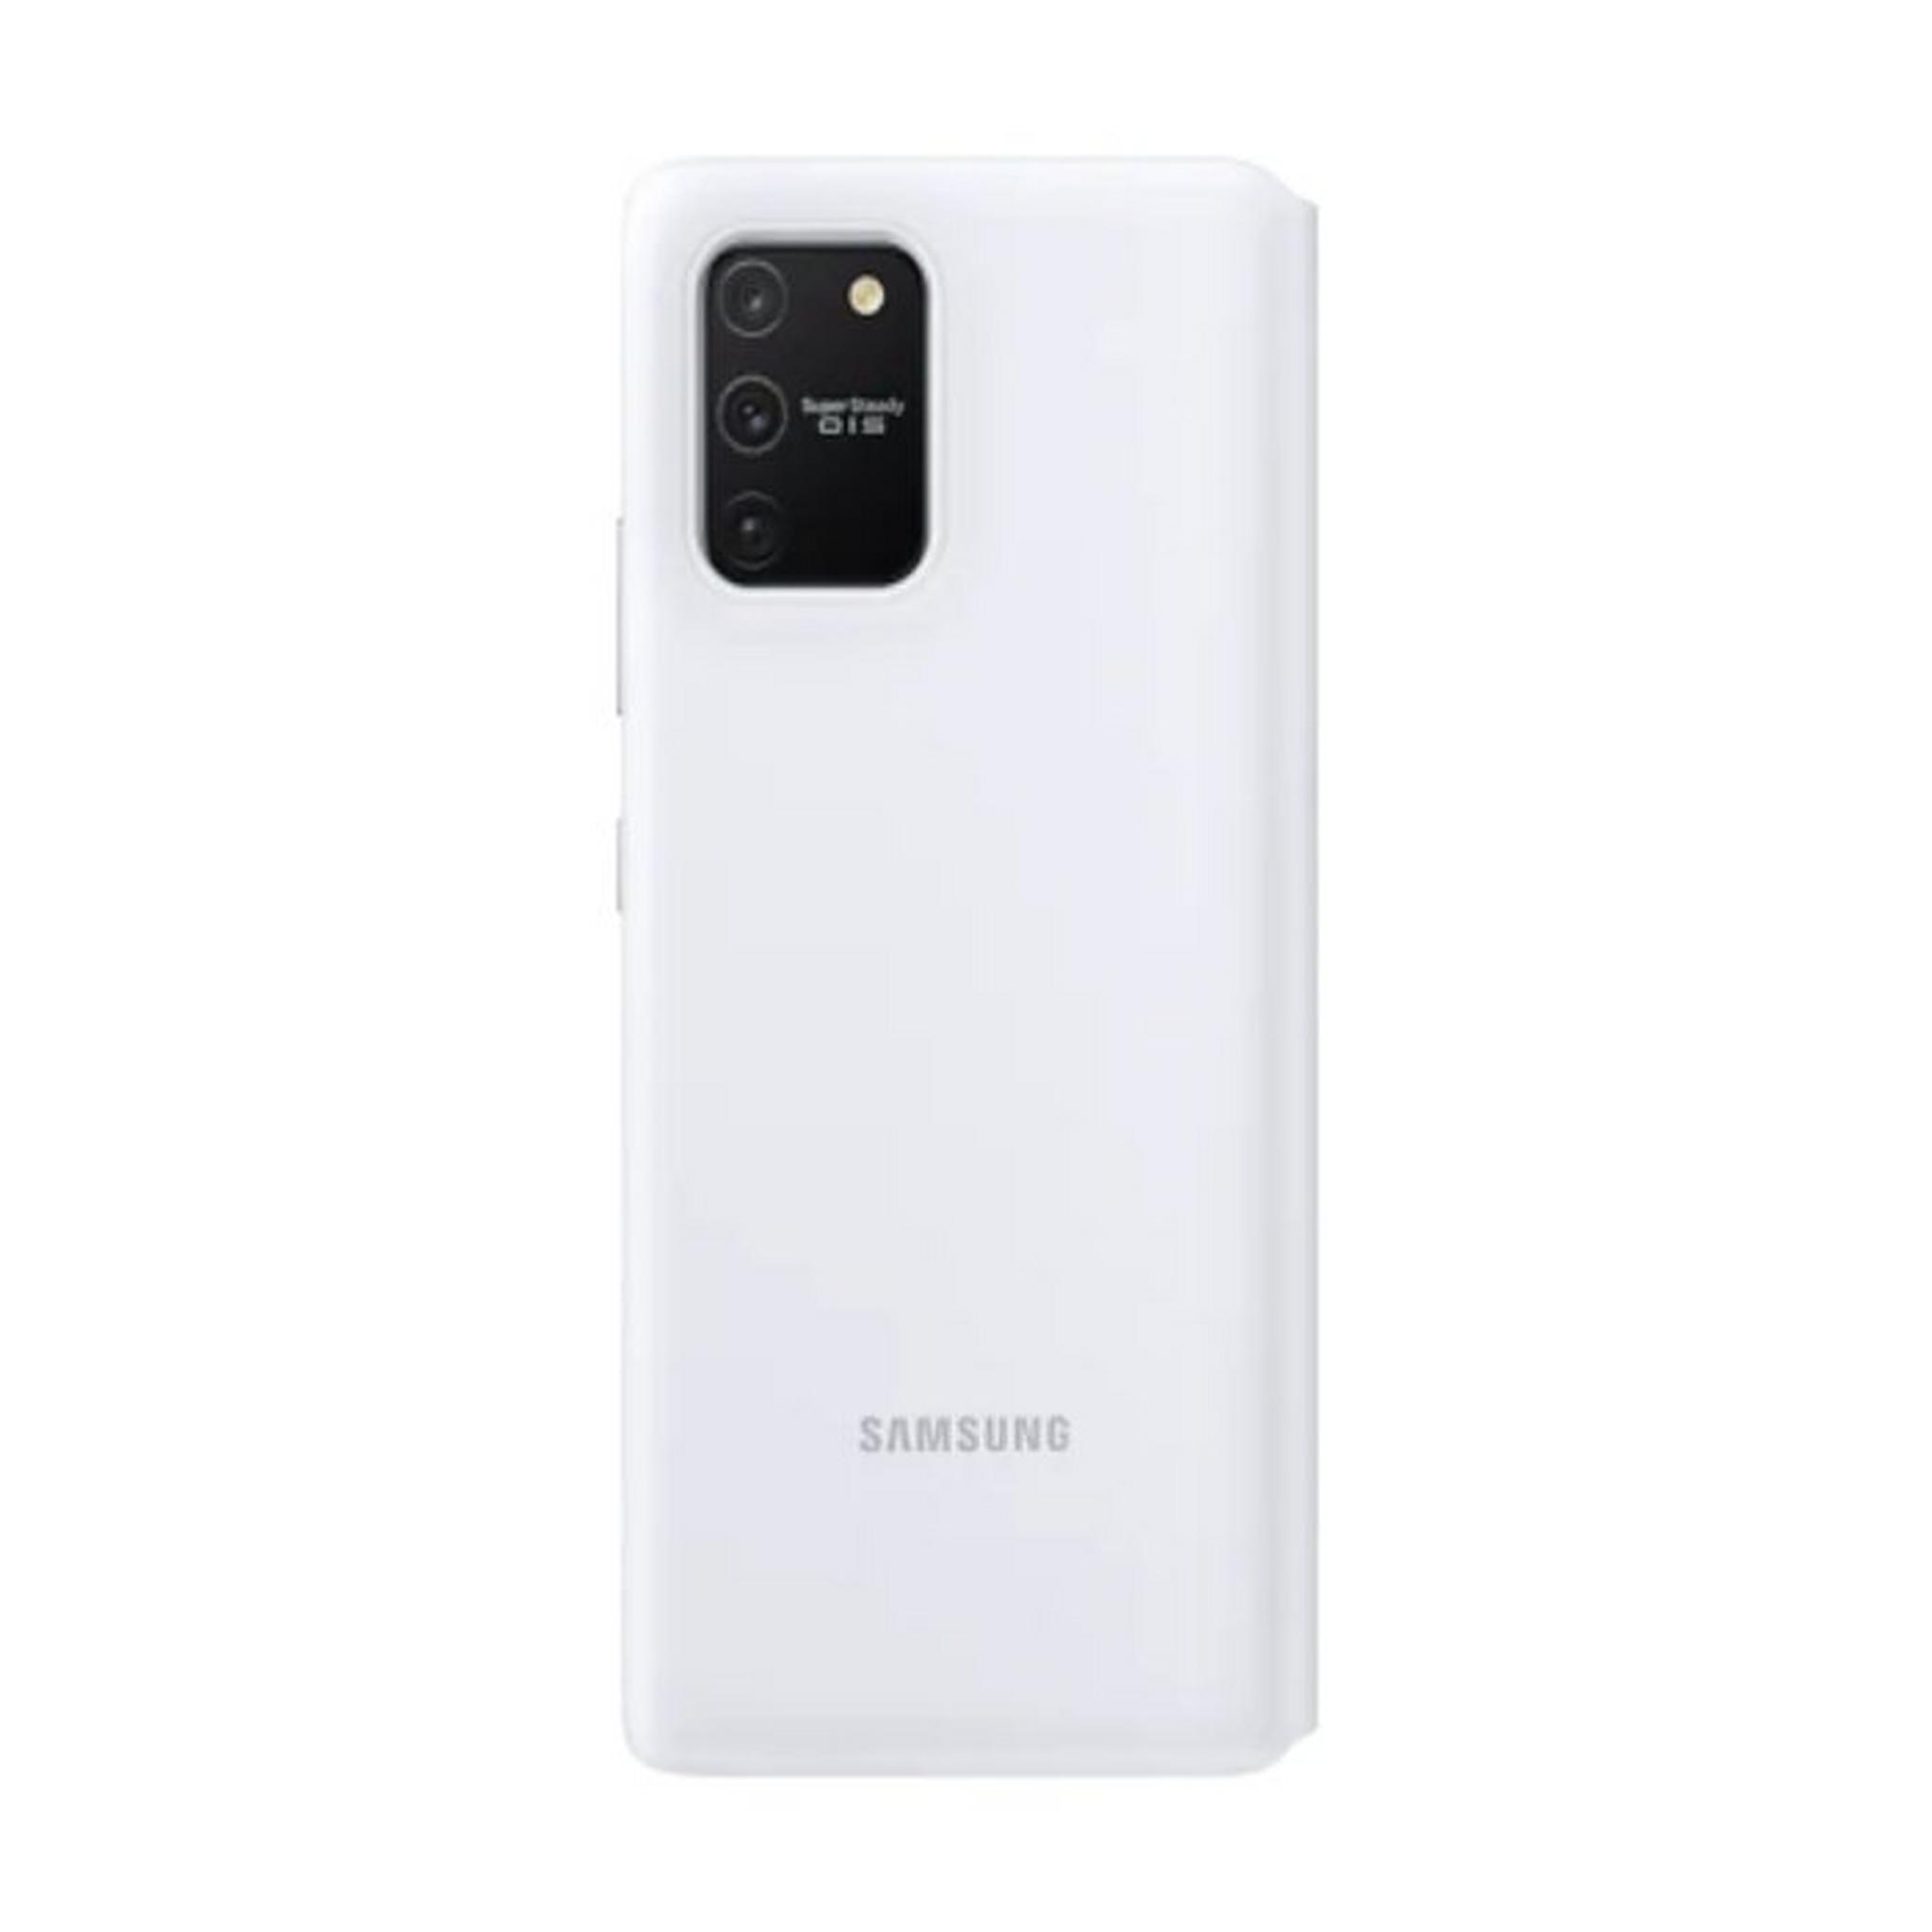 Samsung Galaxy S10 Lite Wallet Cover - White